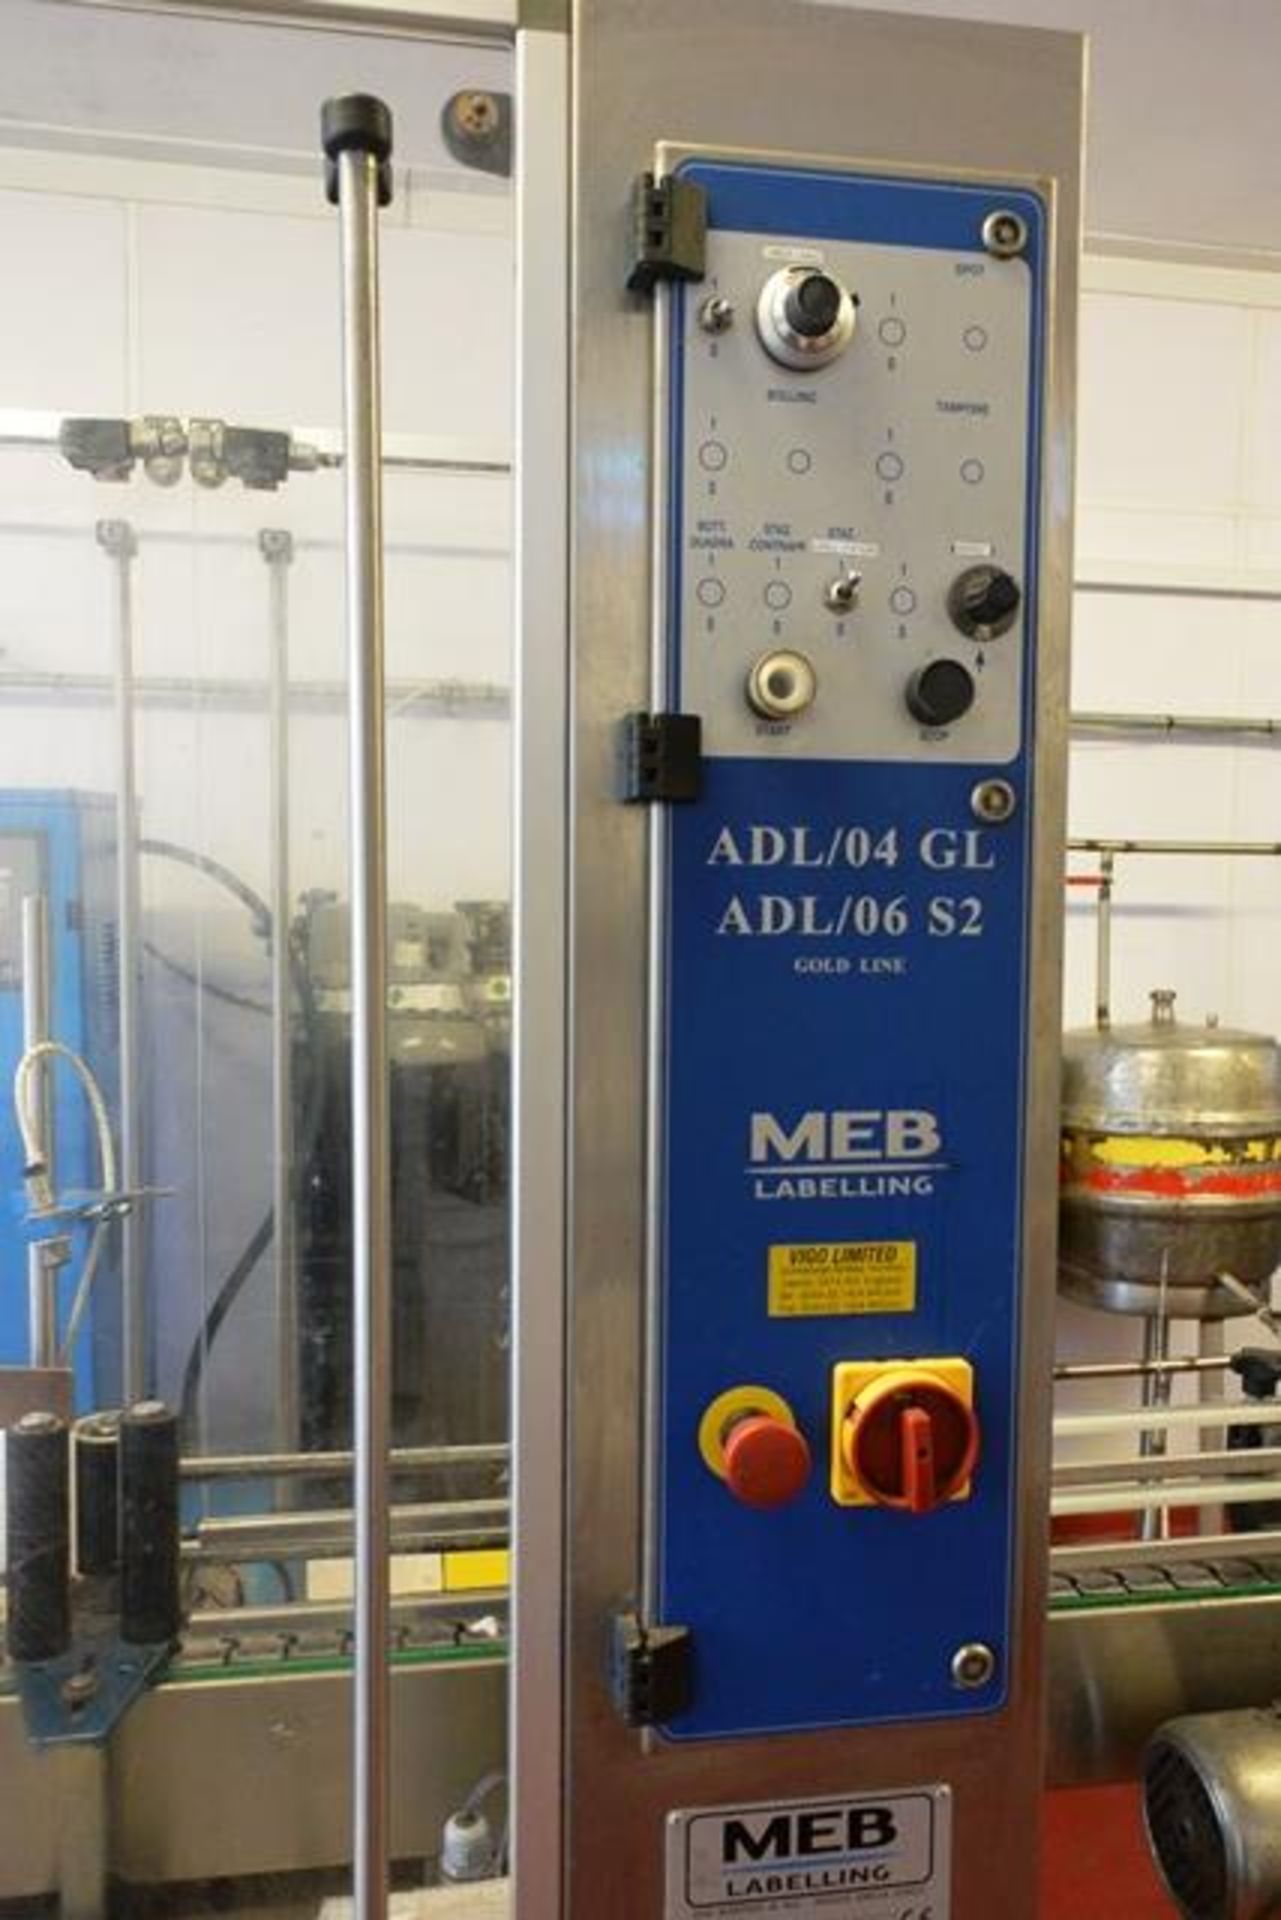 MEB ADL.04 GL stainless steel automatic labelling machine, serial no. 7894 (2004) (3 phase), with - Image 6 of 9